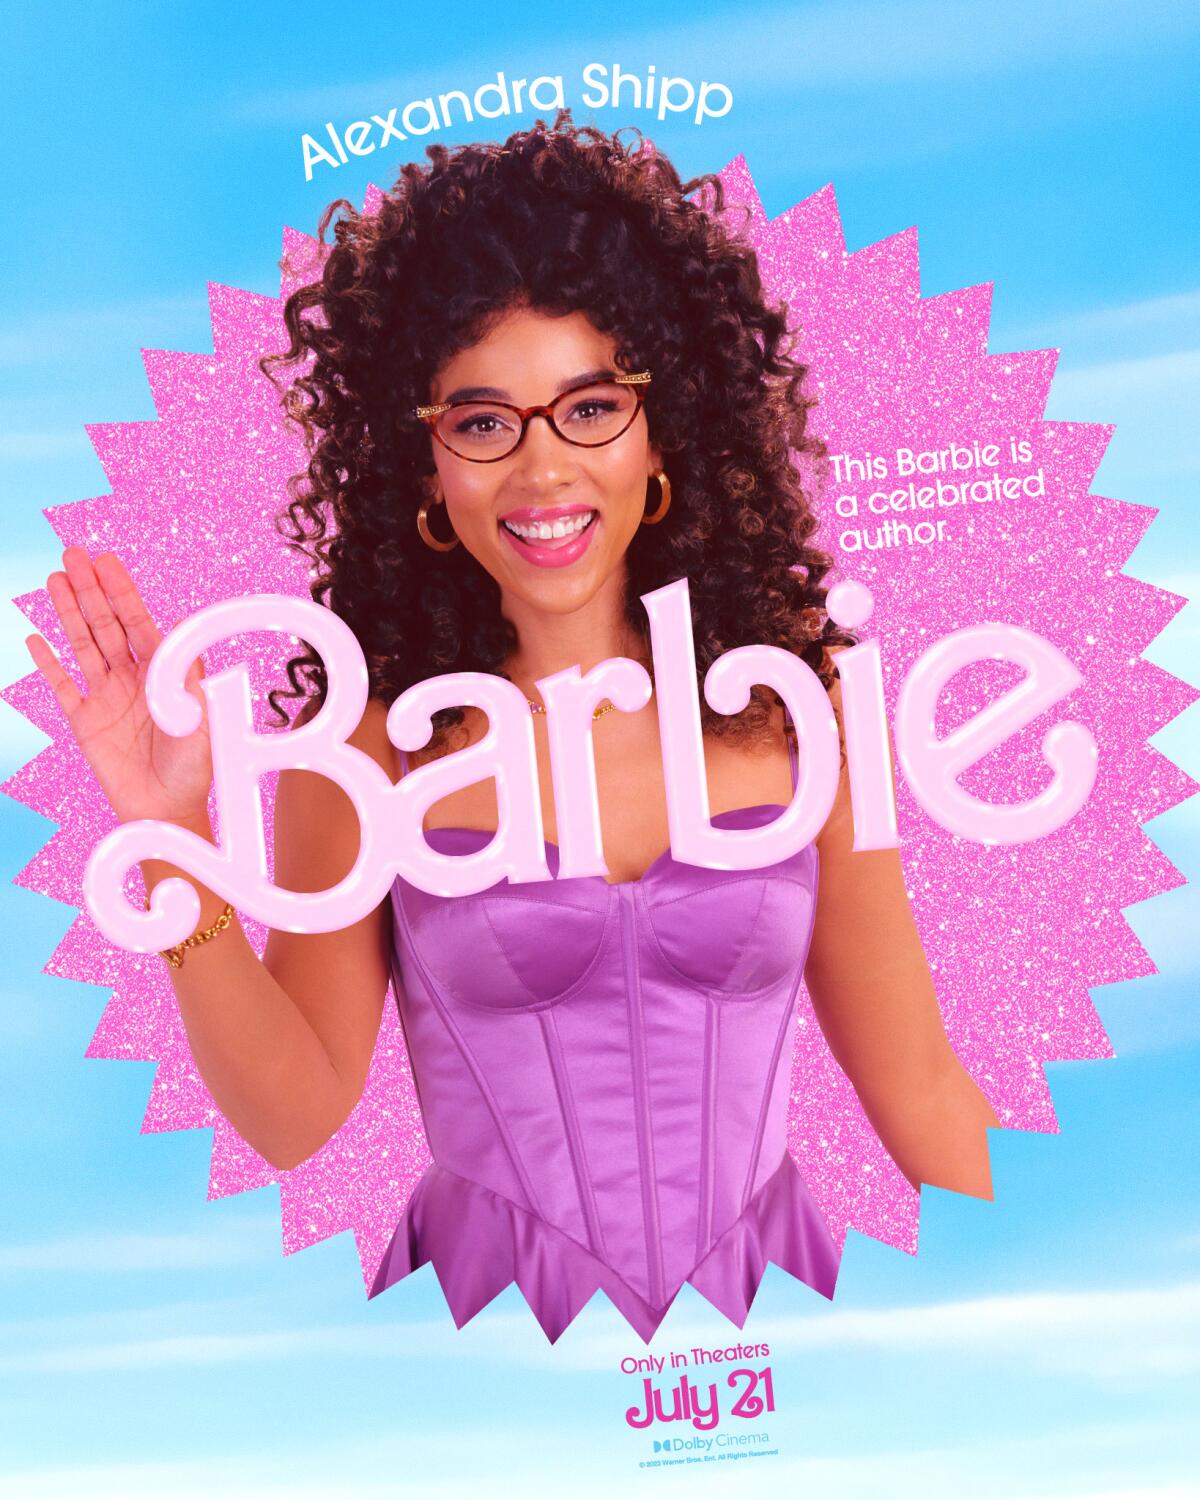 Alexandra Shipp smiles and waves in a "Barbie" movie poster. She wears a purple outfit.